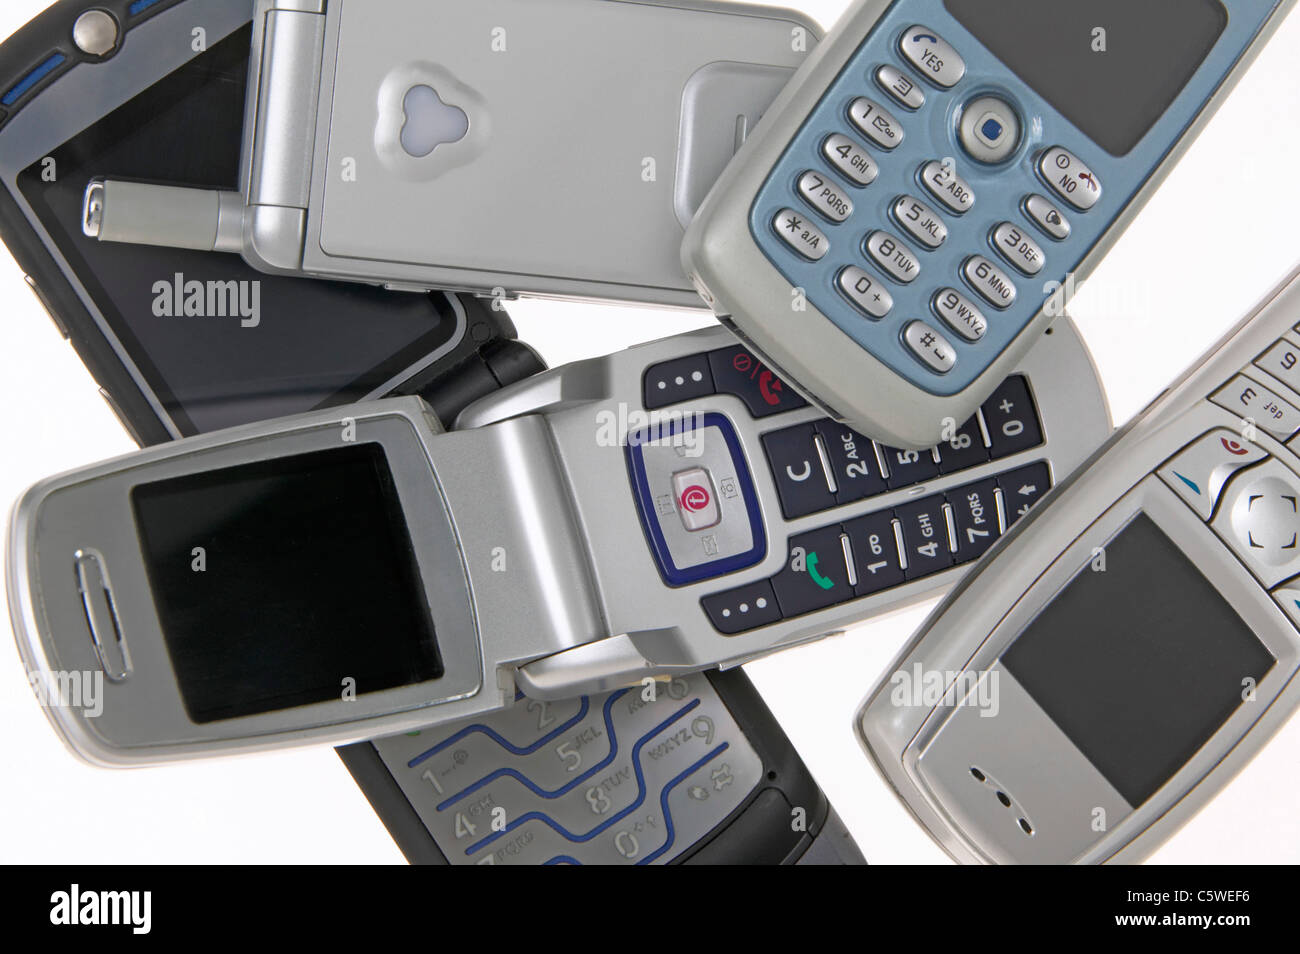 Old mobile phones, elevated view Stock Photo